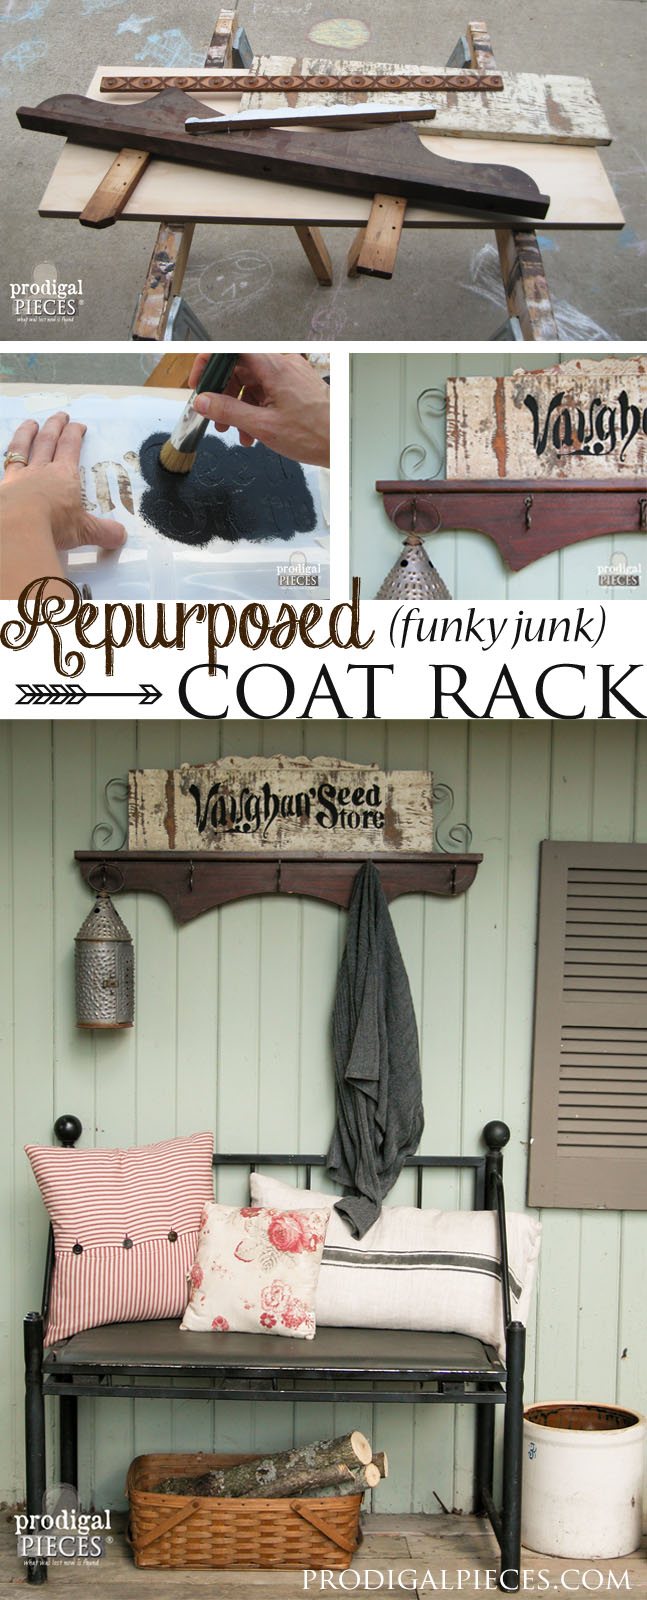 Create a repurposed coat rack using cast off barn wood and furniture pieces | Prodigal Pieces | www.prodigalpieces.com